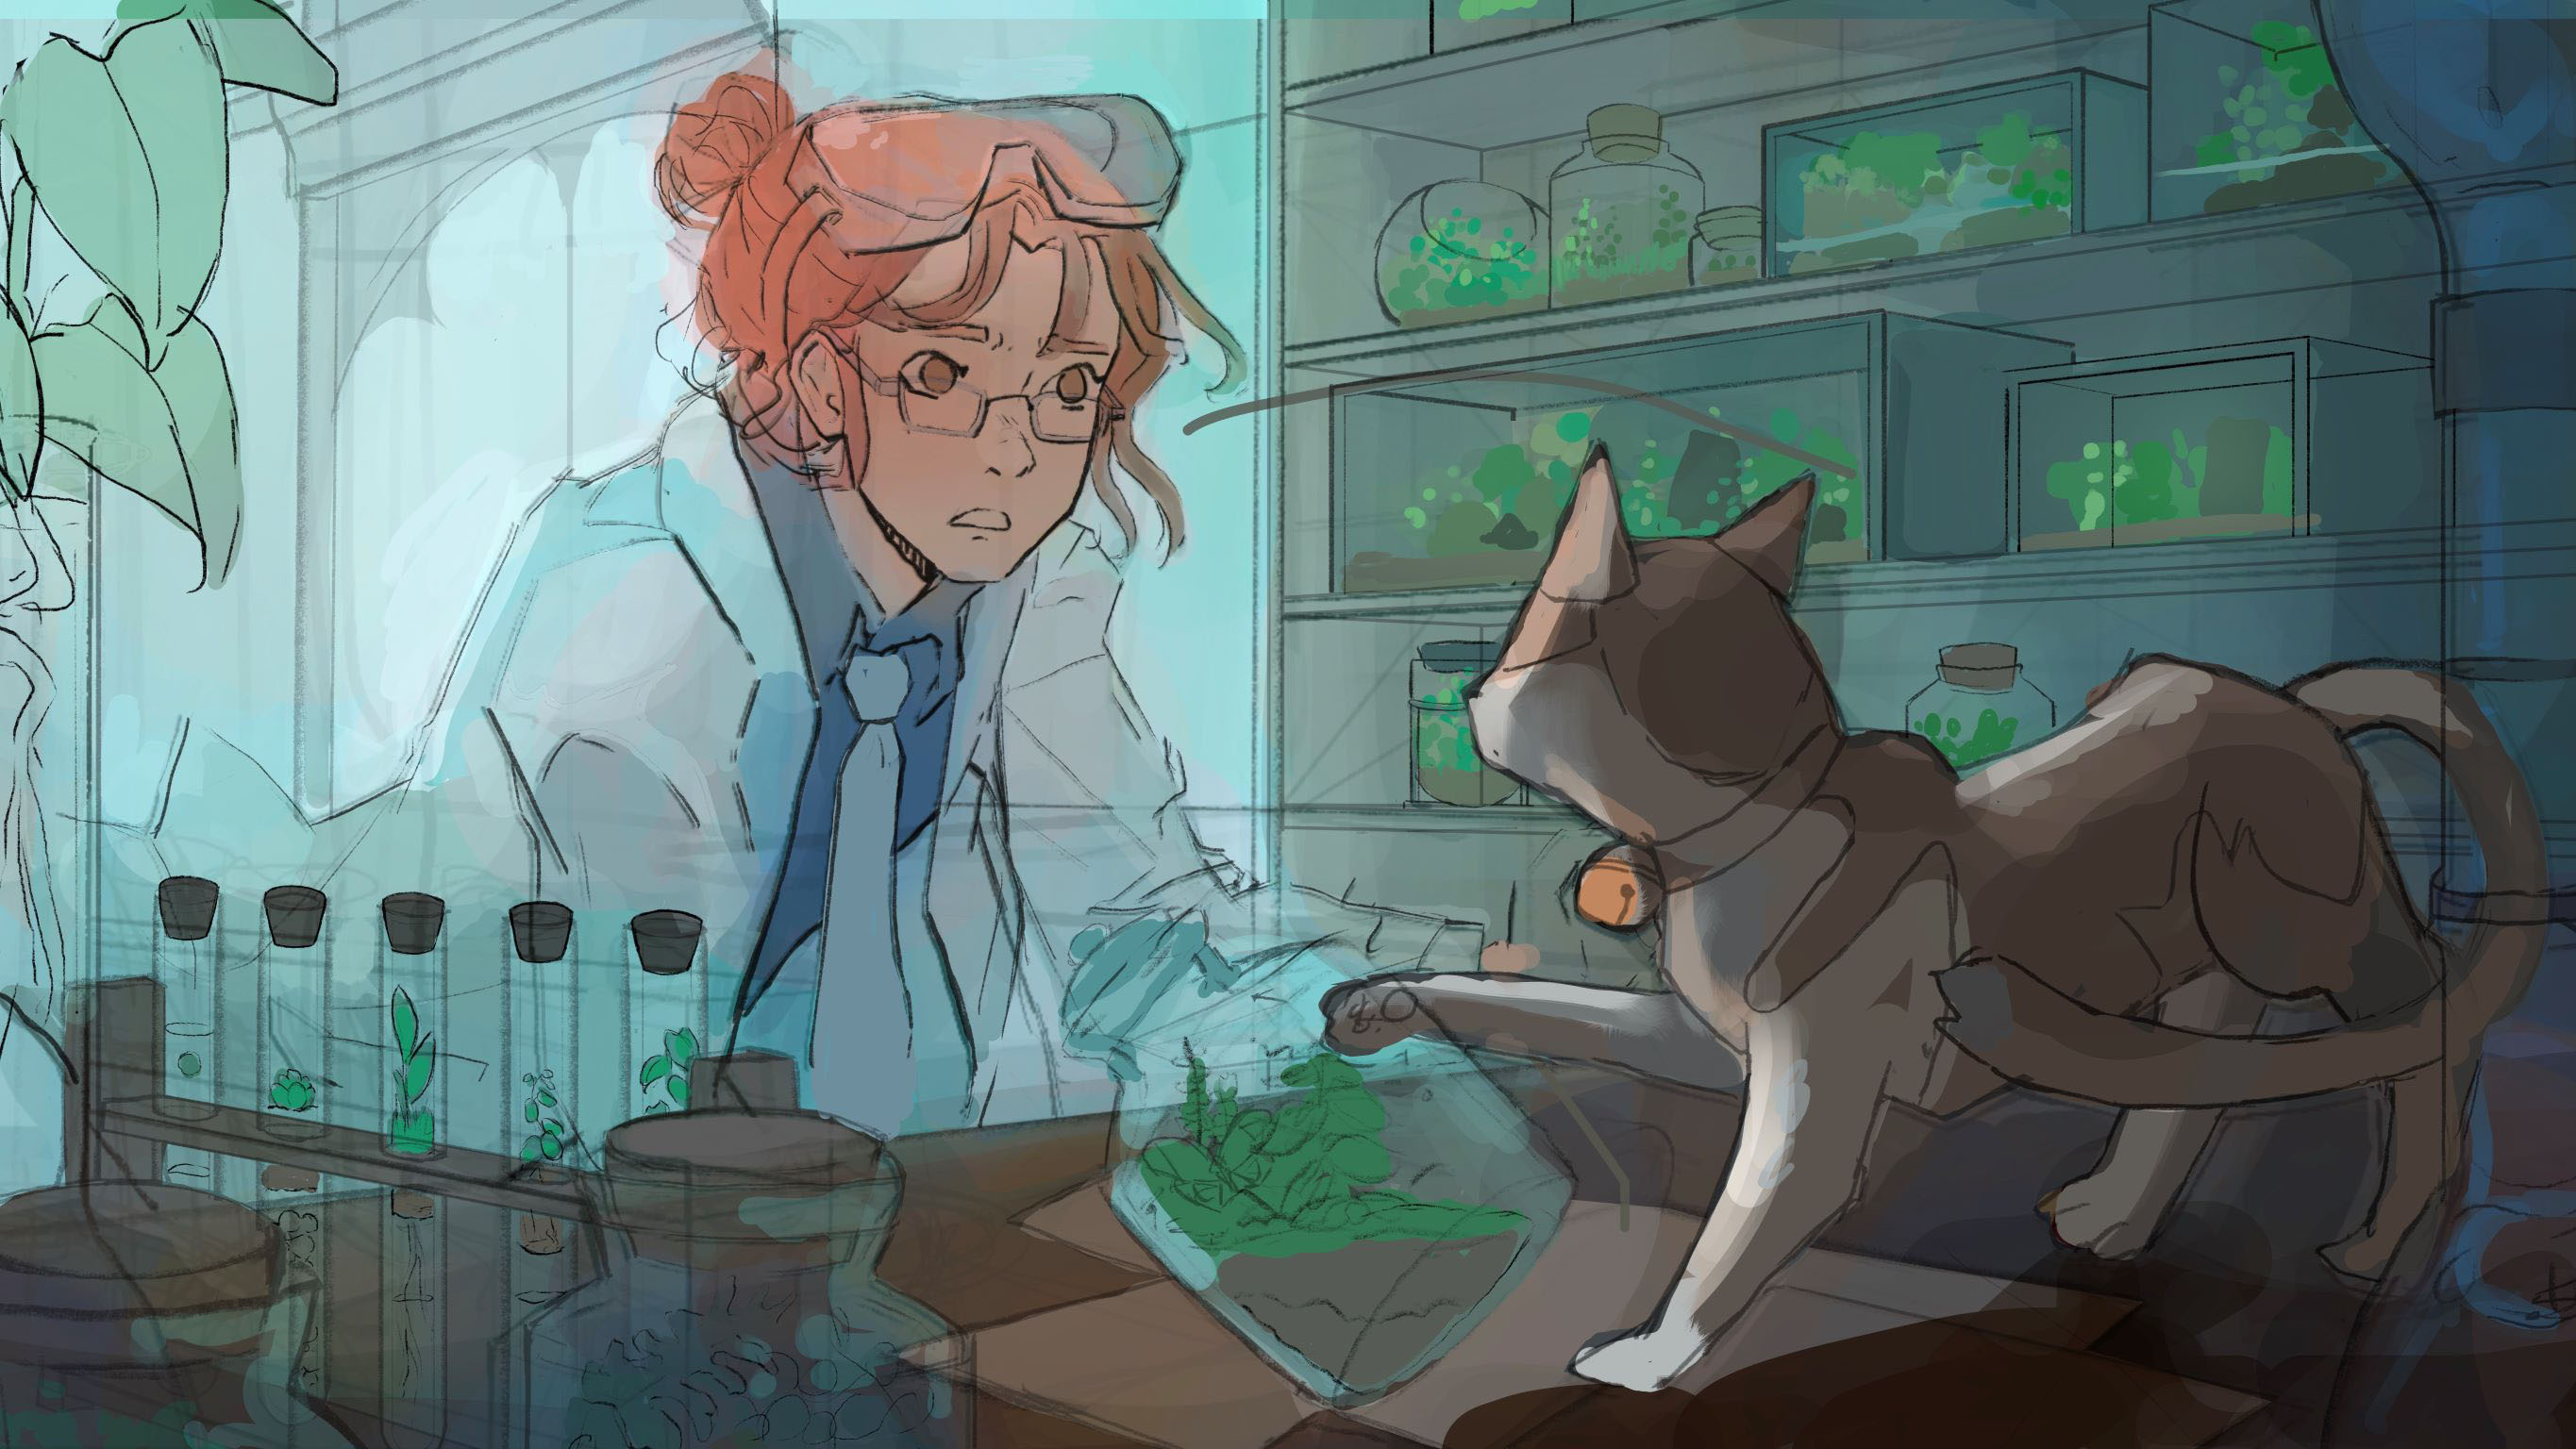 Illustration of person in a lab coat watching a cat knock over a jar containing a plant, by Nicholas Larsen